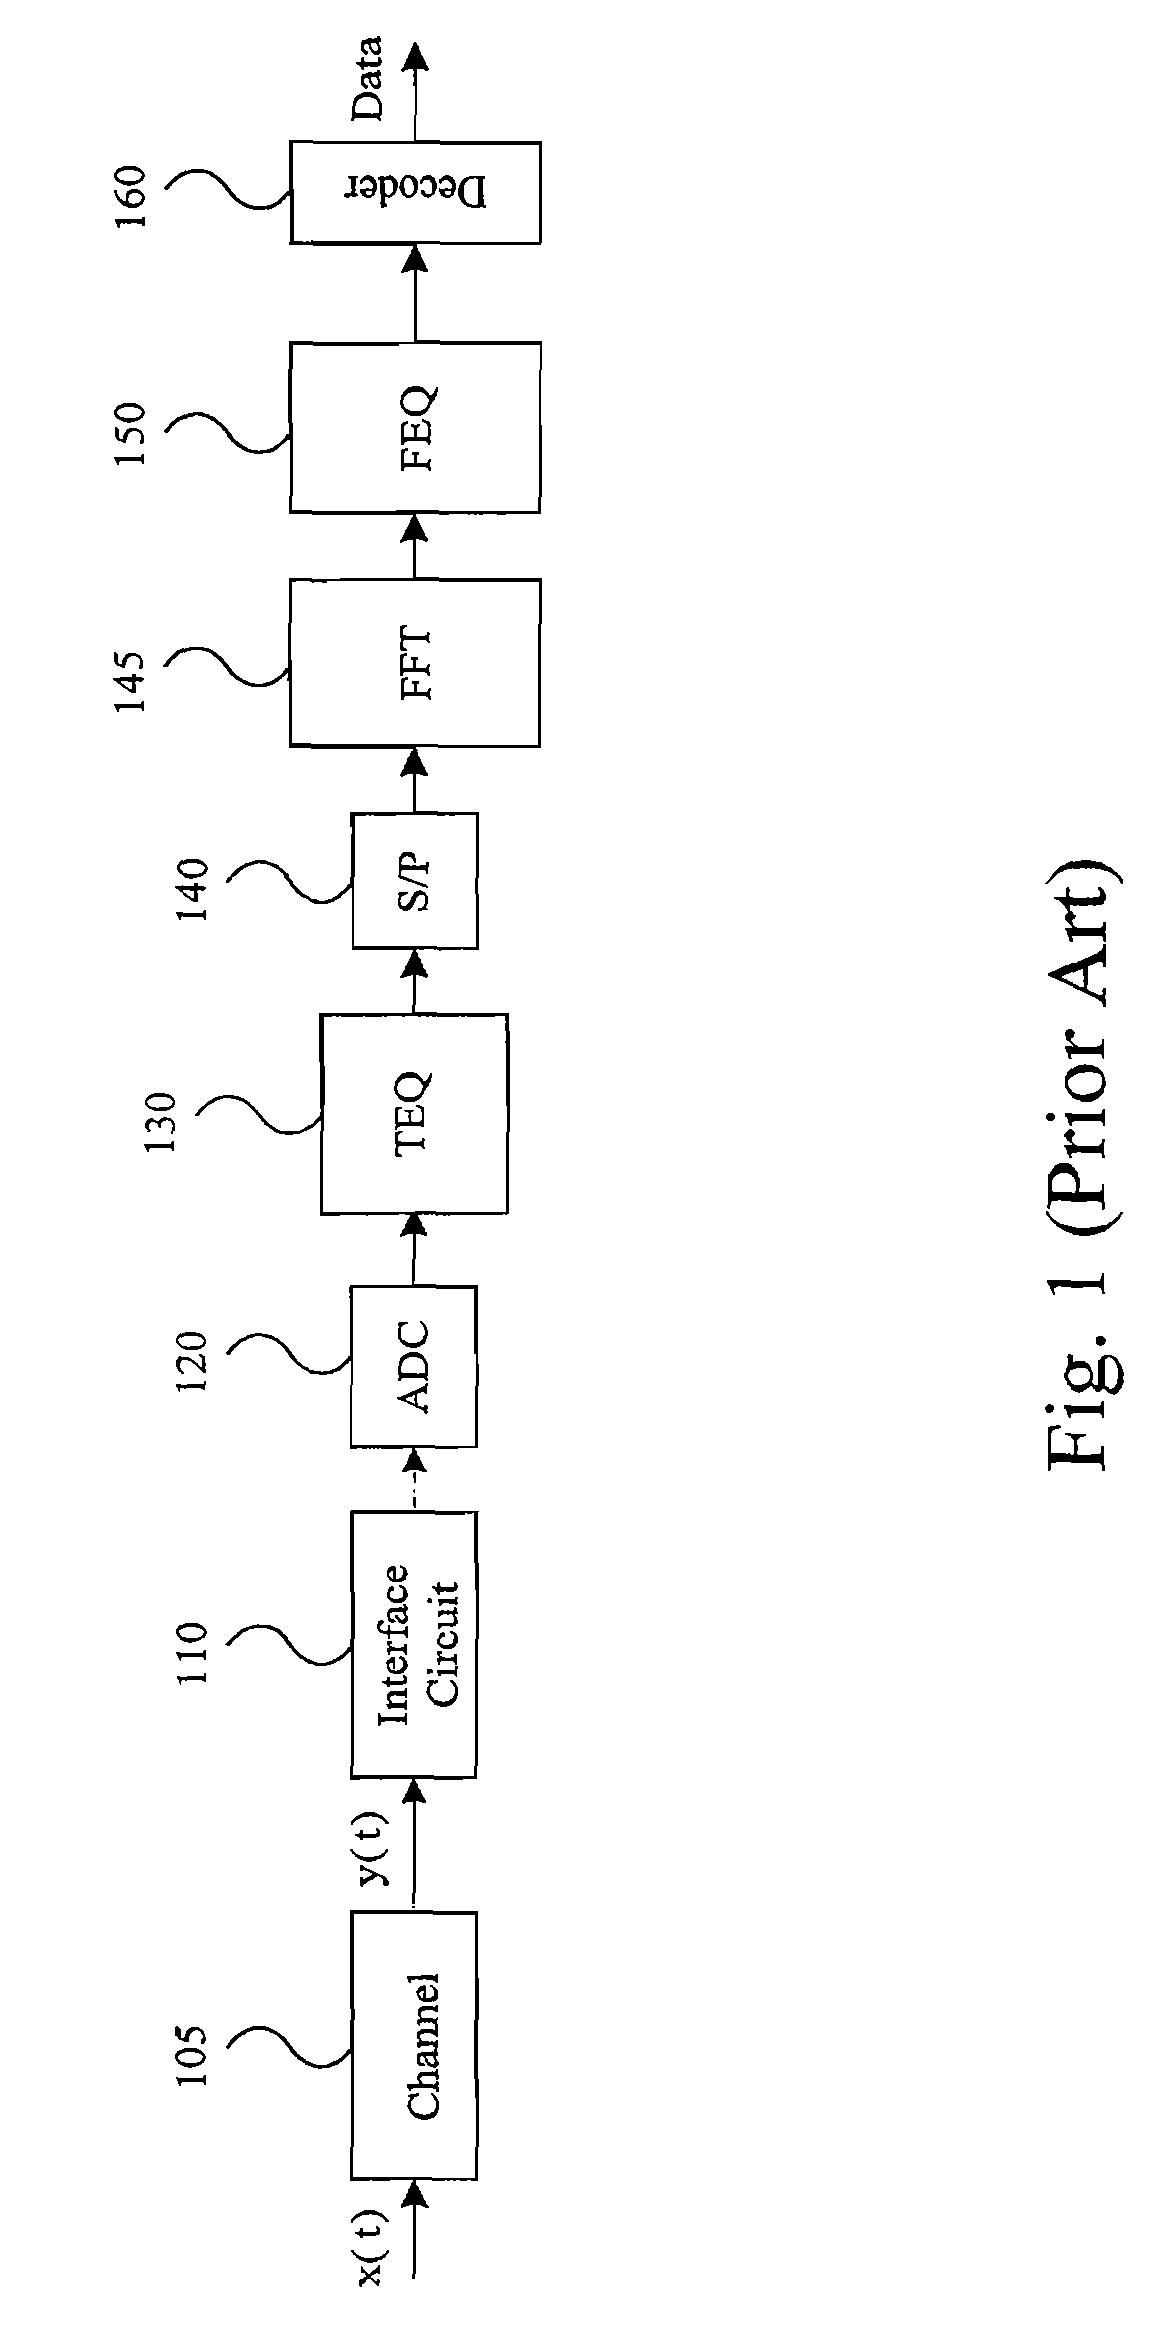 System and Method for Time-Domain Equalization in Discrete Multi-tone Systems